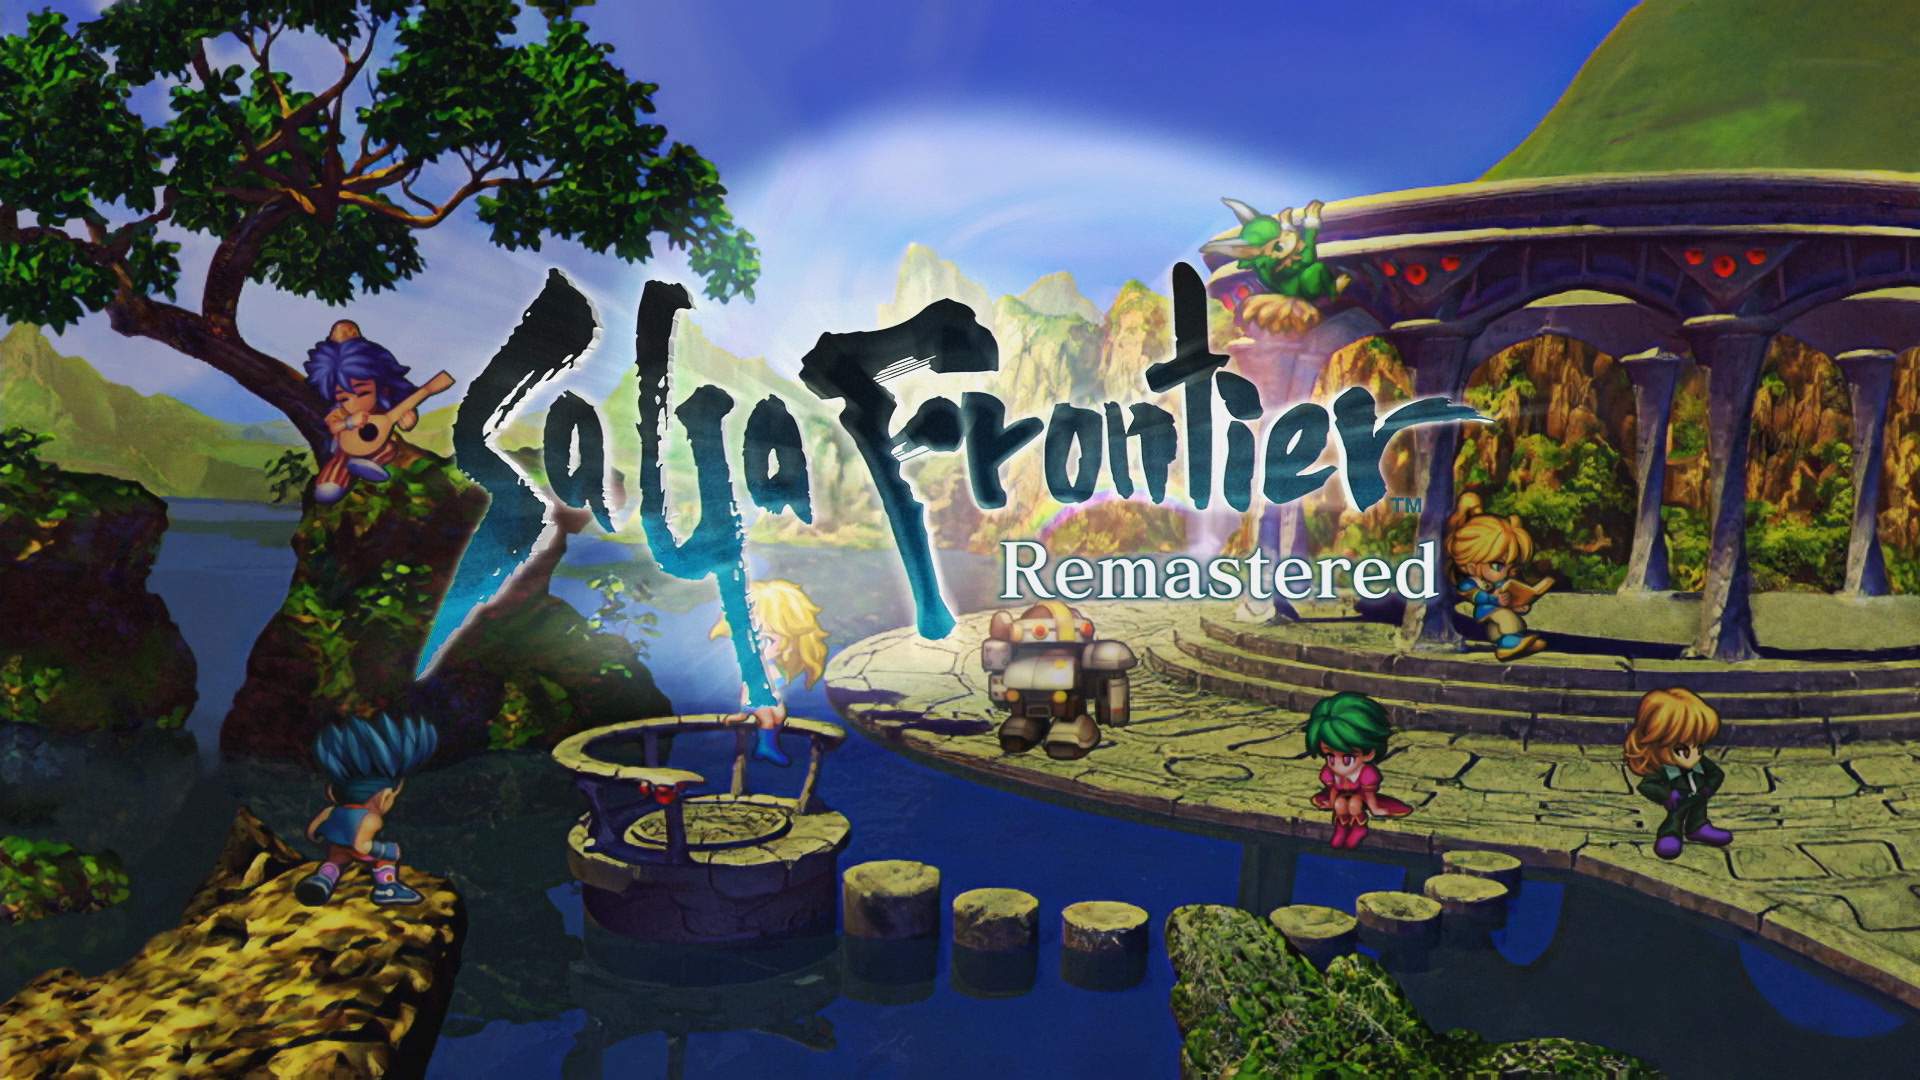 All 8 SaGa Frontier Remastered protagonists around a lake, the game logo in the centre of the image.